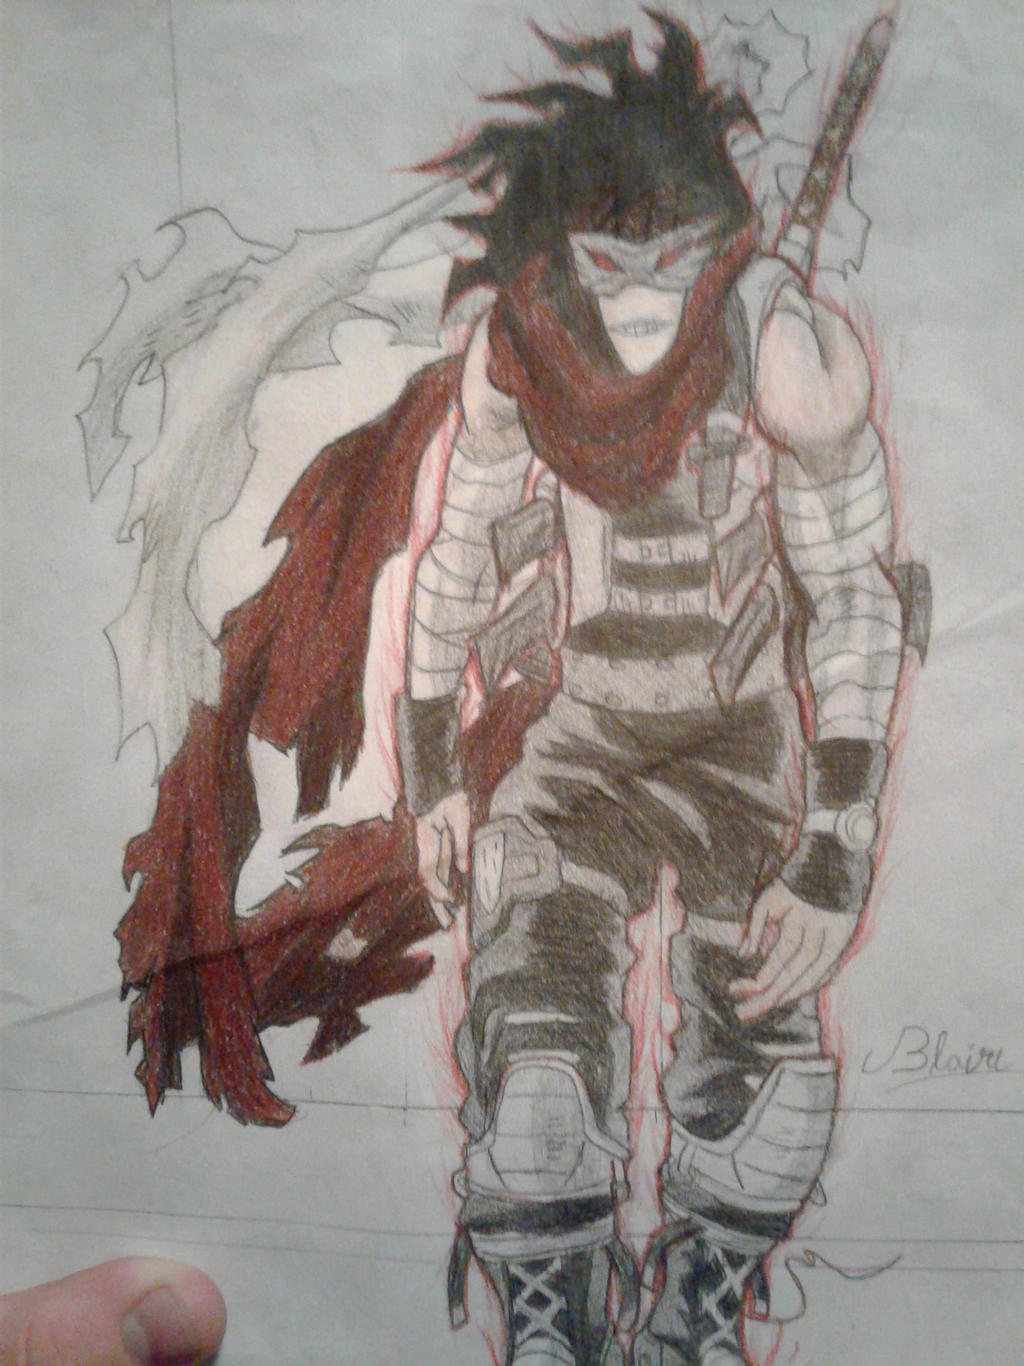 Stain my hero academia by Icarus0620 on DeviantArt